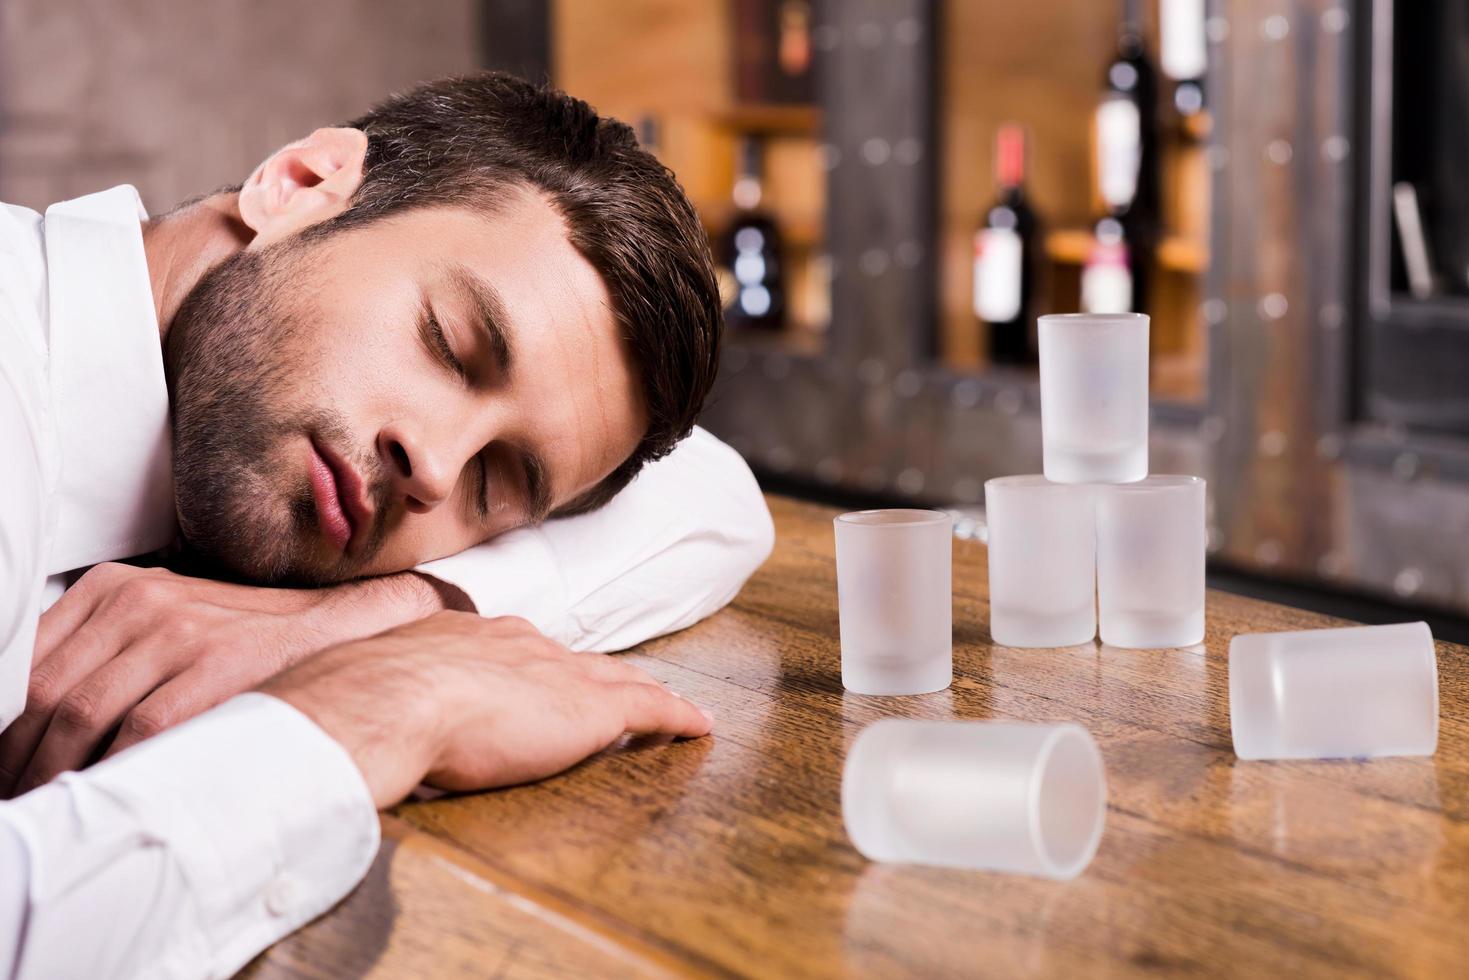 Drunk again. Drunk man in white shirt leaning at the bar counter and sleeping while empty glasses standing near him photo